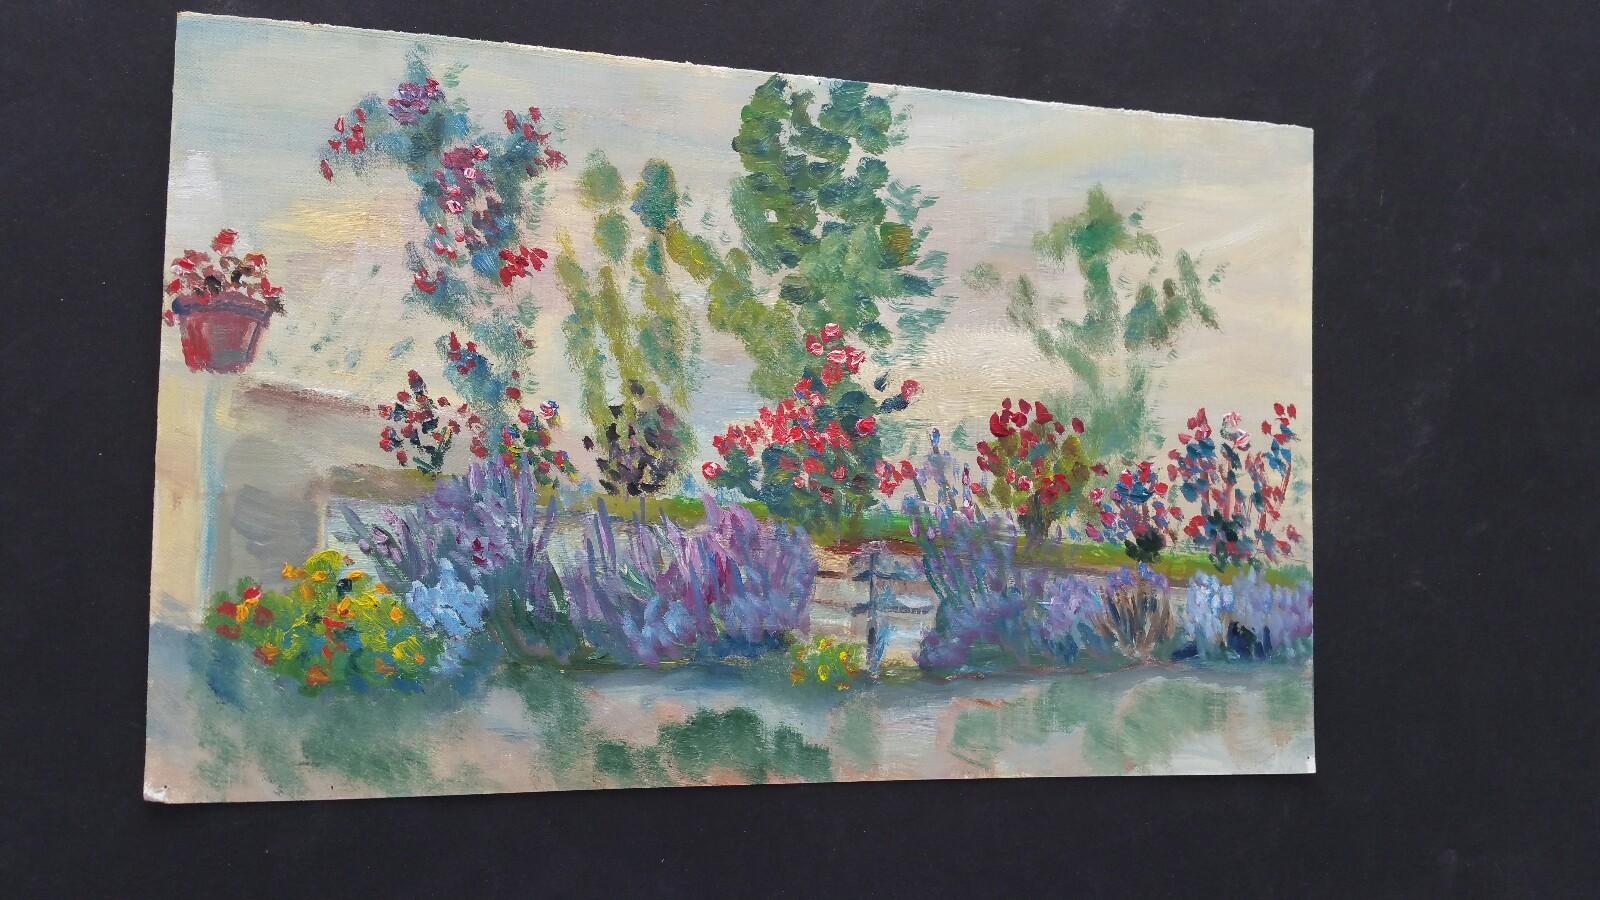 Summer Garden Border
French School, mid-late 20th century
unsigned
oil painting on canvas textured paper (reverse side is smooth, the painted side looks and feels as canvas), unframed
overall 9 x 15 inches

Lavender, roses and a terracotta pot of,